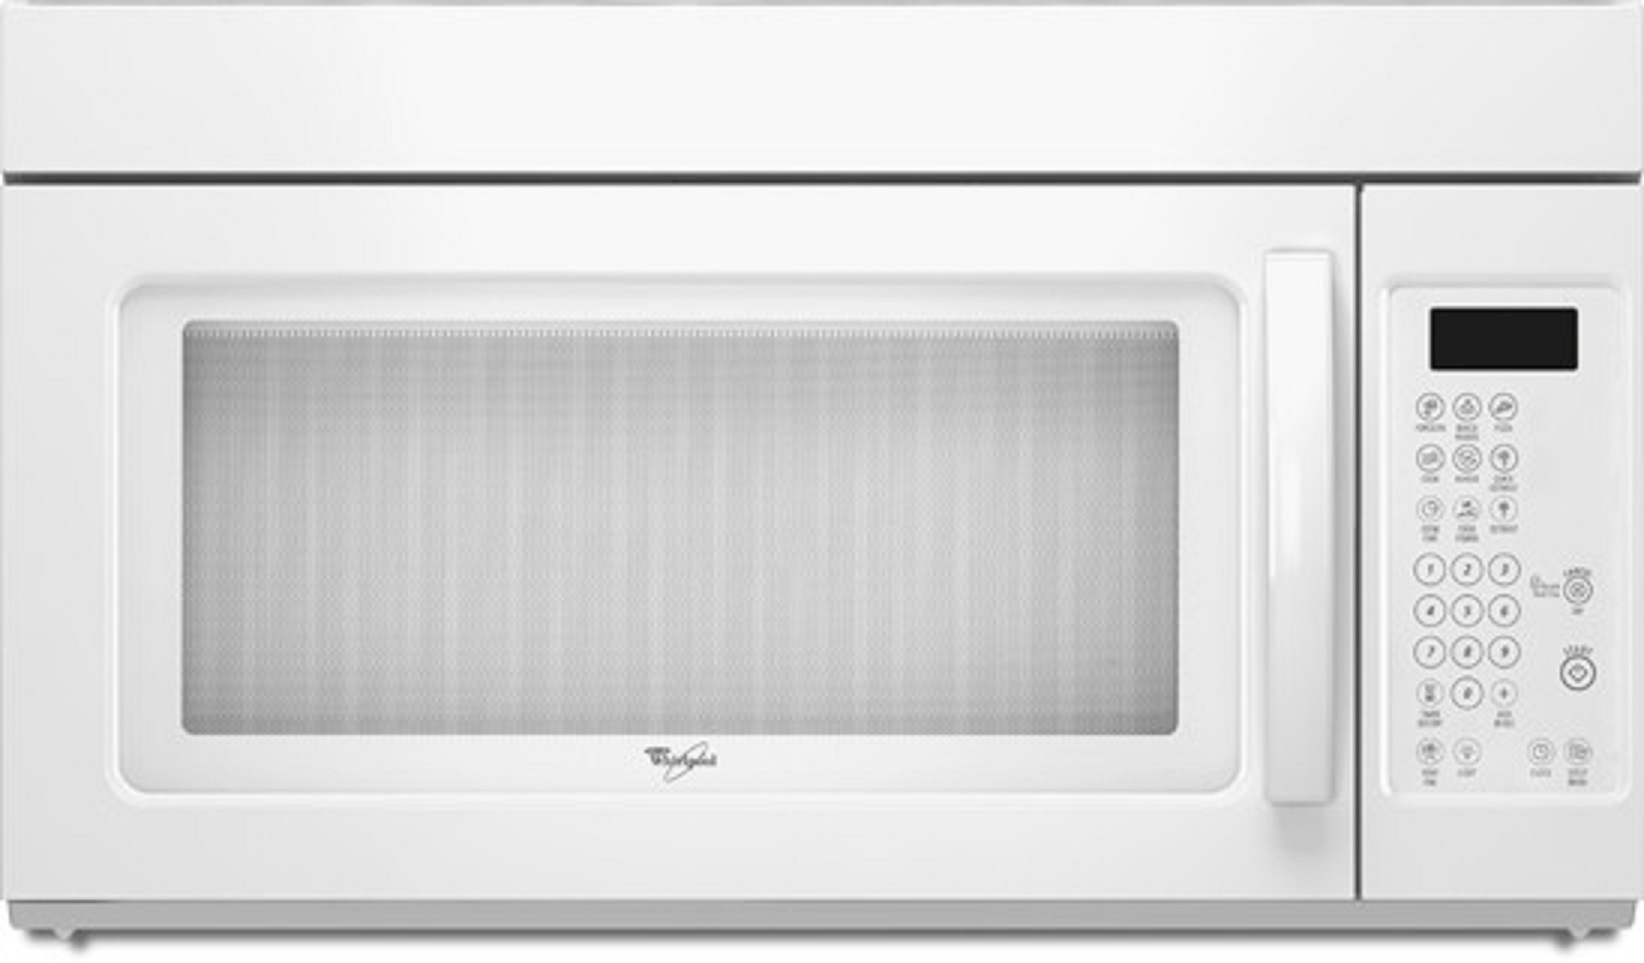 Whirlpool WMH1163XVQ 30 Inch Over the Range Microwave Oven White